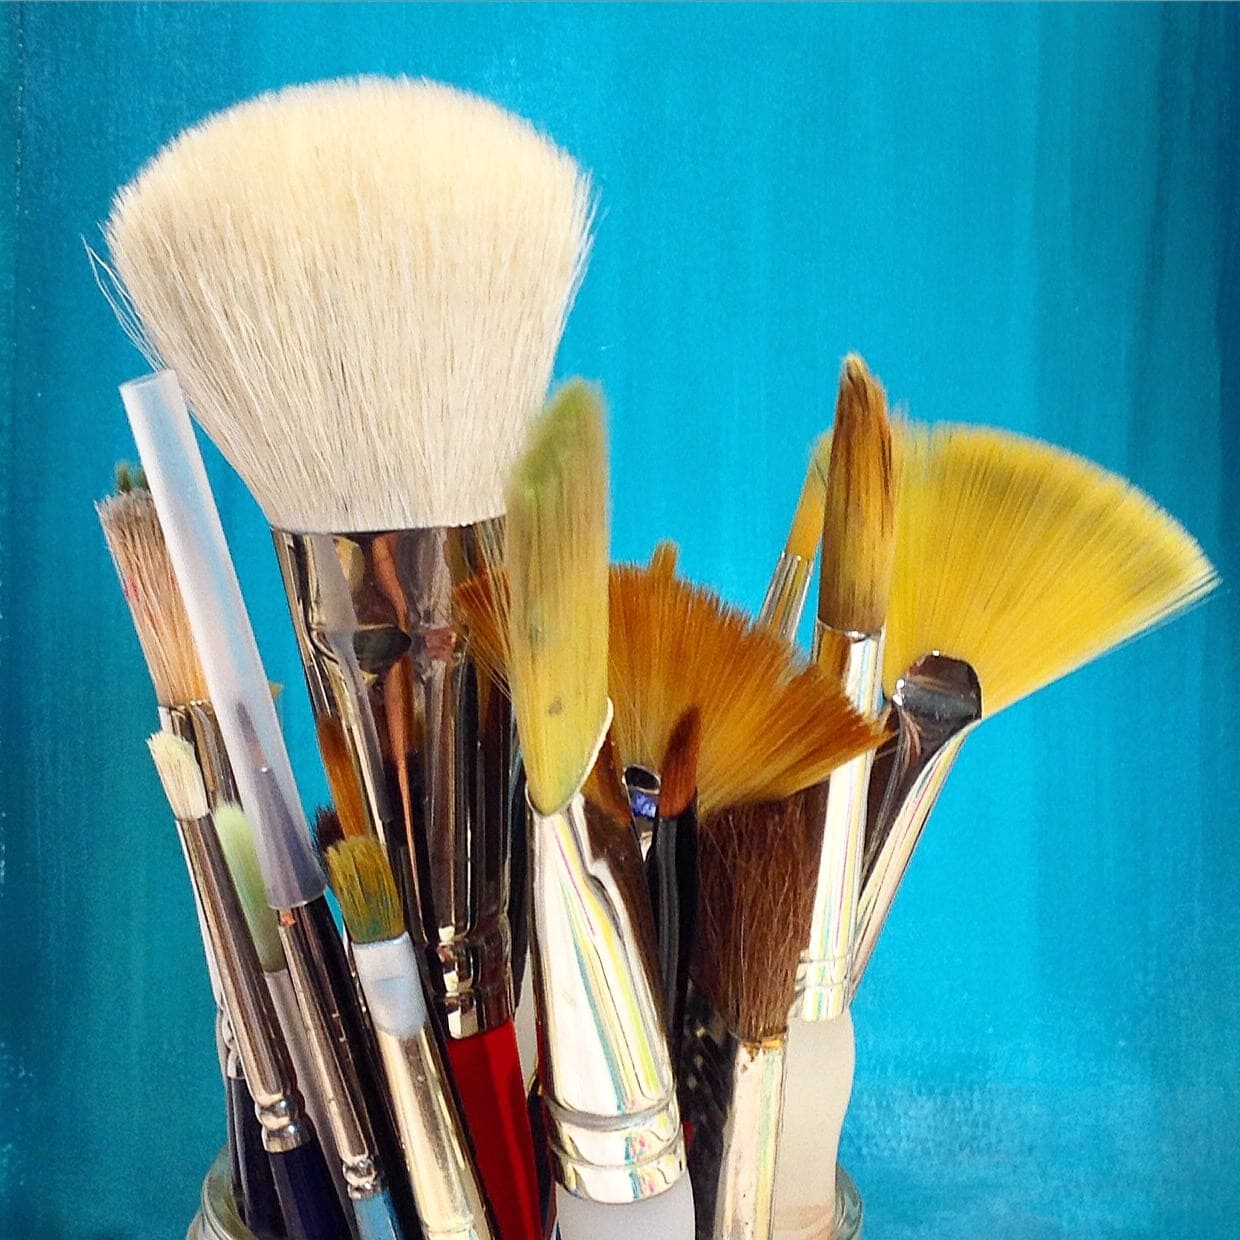 jar of assorted art paint brushes, in front of a blue painted background